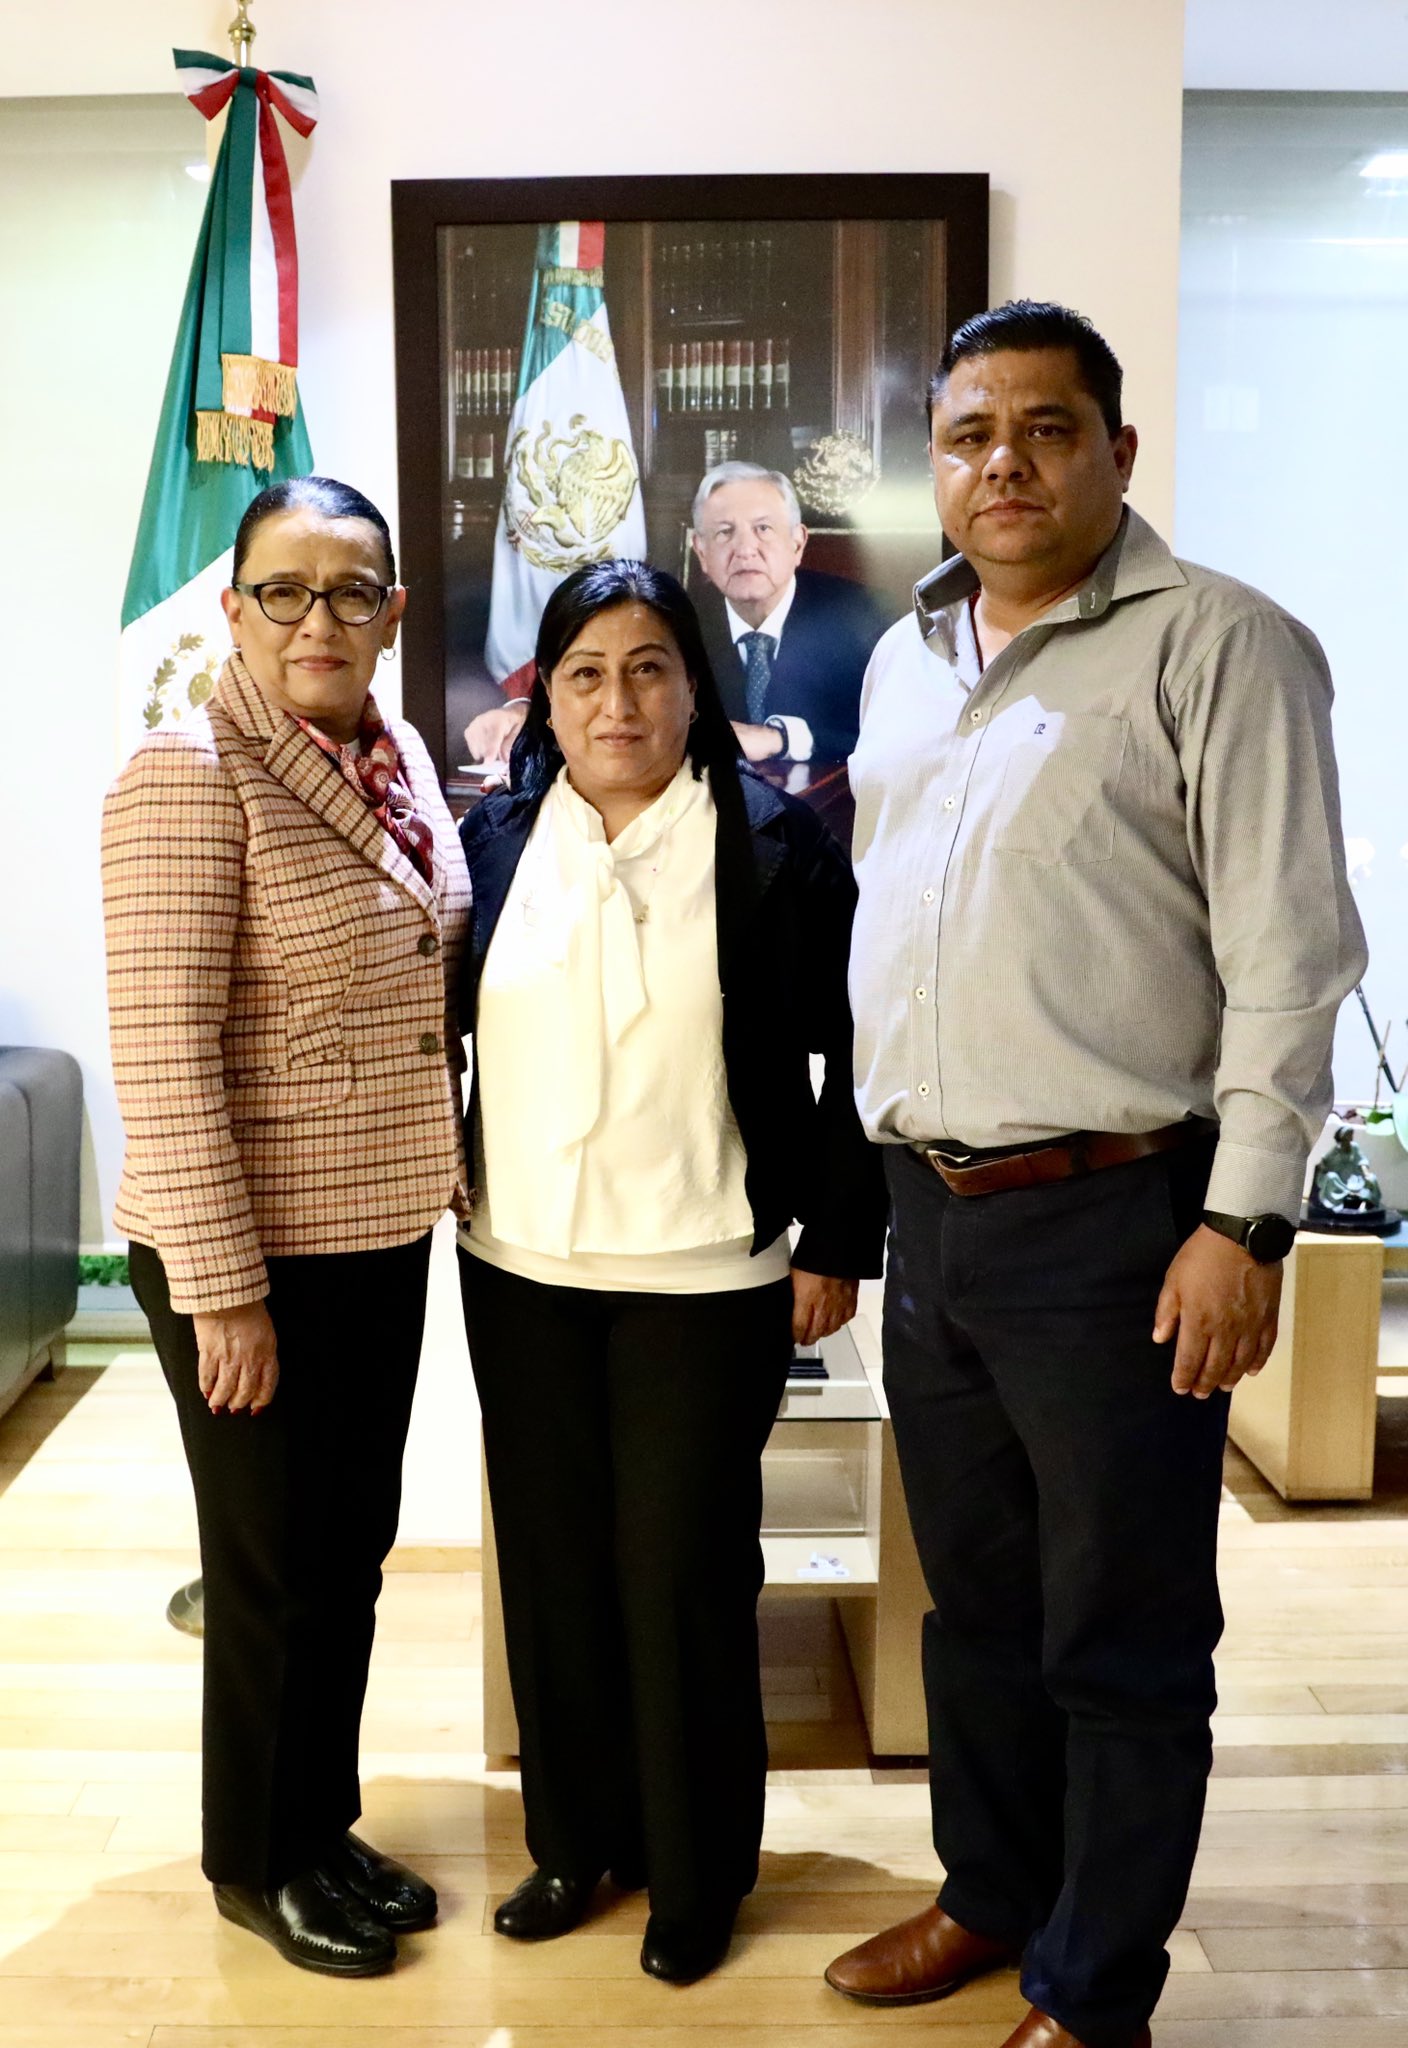 Debanhi Escobar's parents met with the head of the SSPC (Rosa Icela Rodríguez)